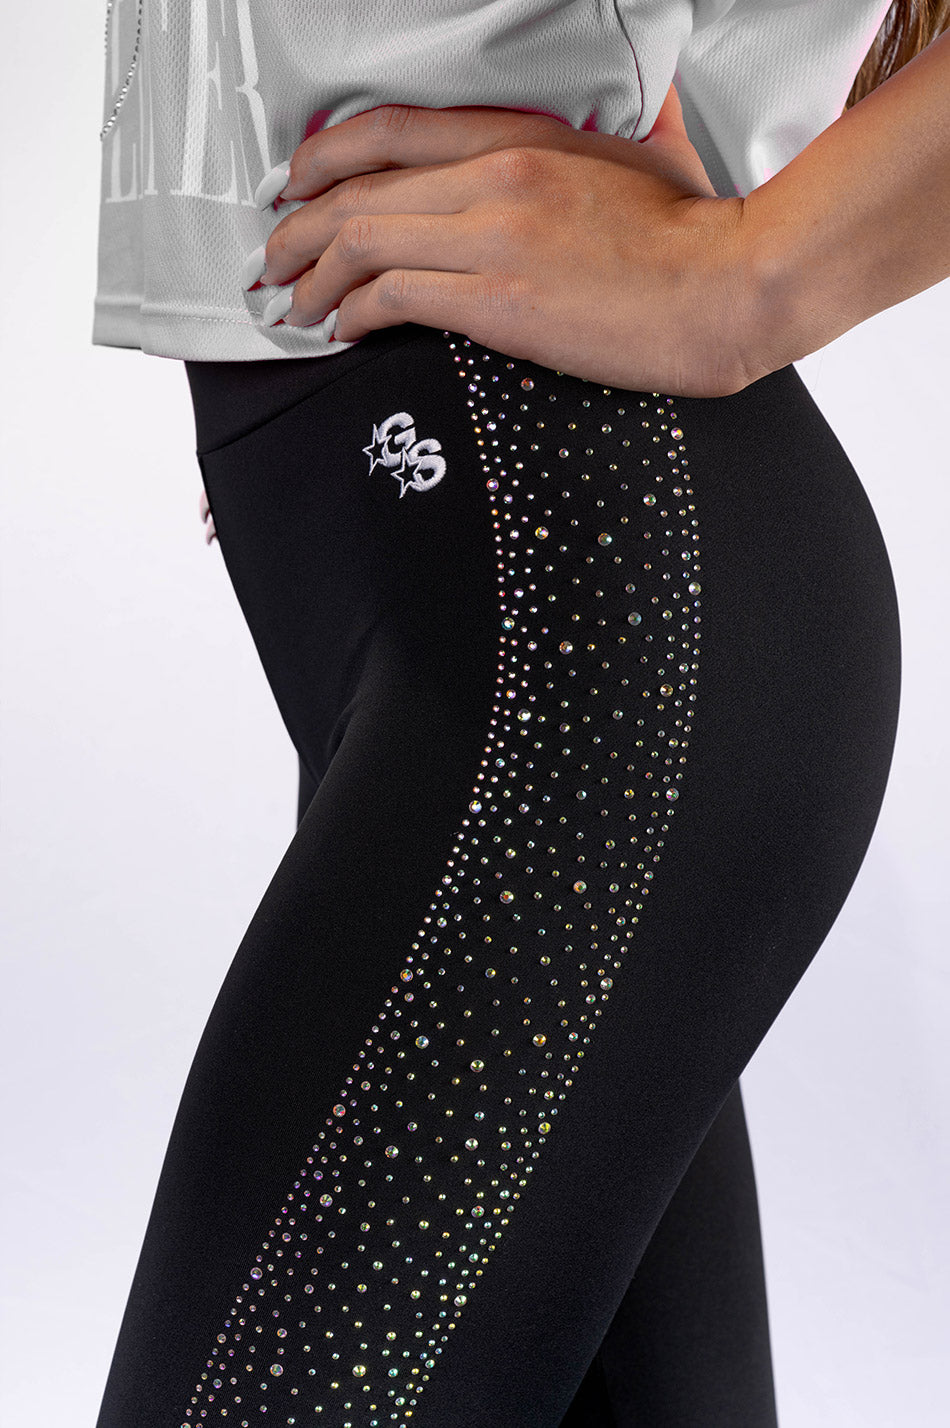 Black Leggings with Bling side Accents - C9